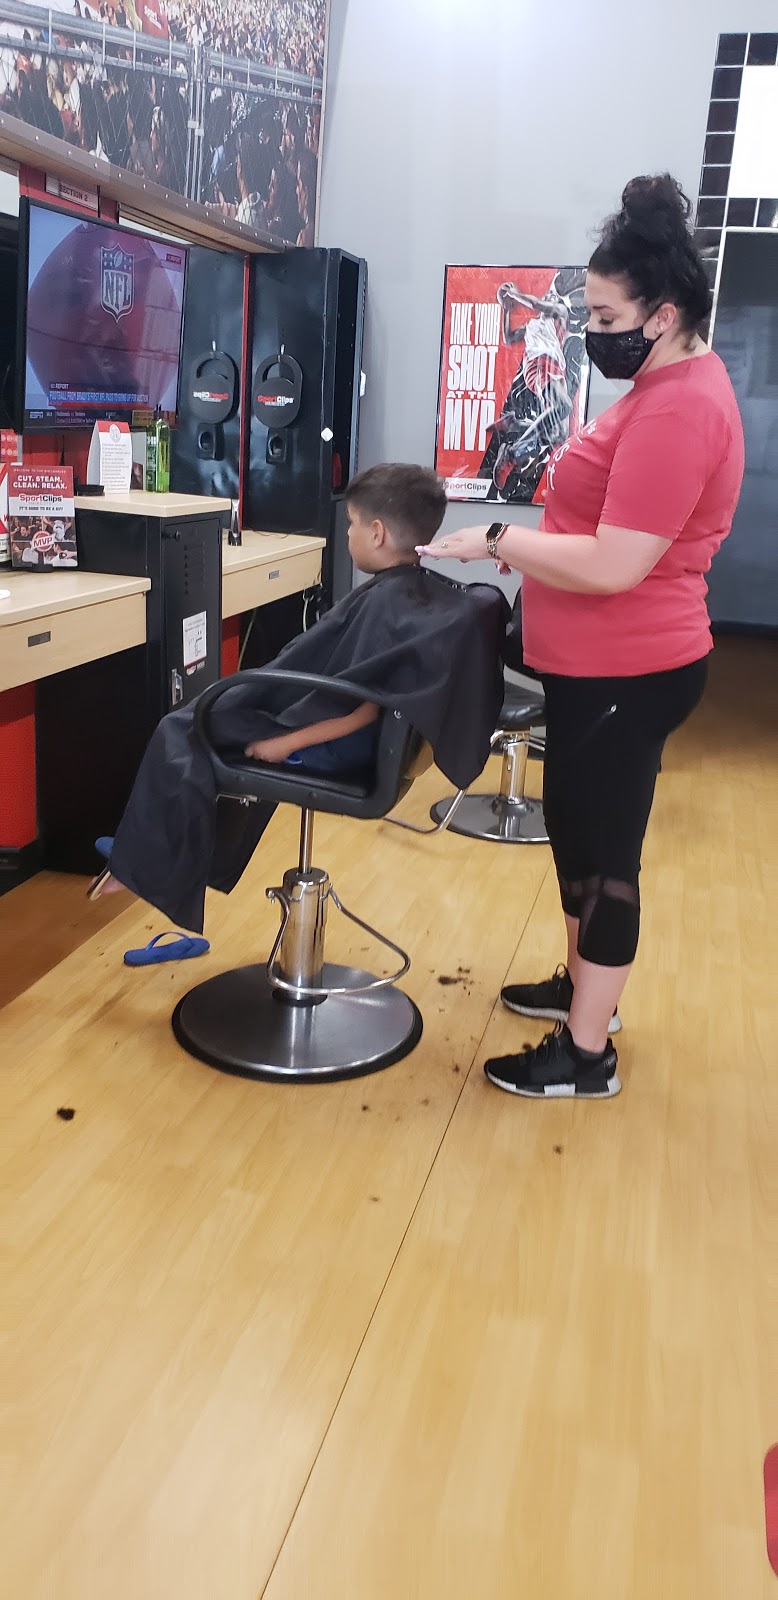 Sport Clips Haircuts of Fultondale | 3441 Lowery Pkwy Suite 123, Fultondale, AL 35068 | Phone: (205) 841-0430